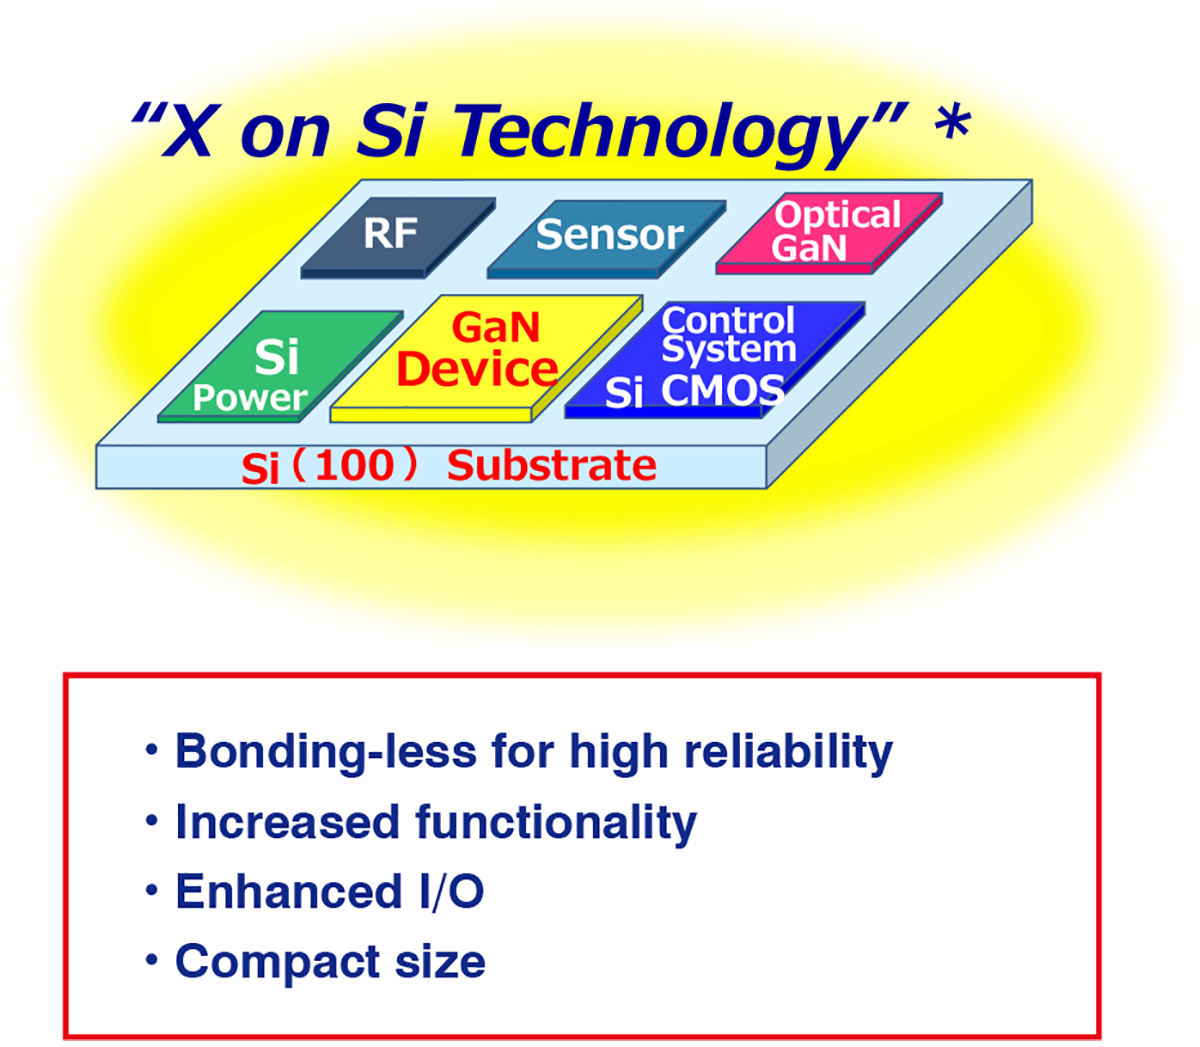 Advantages of GaN on Si Power device Technology